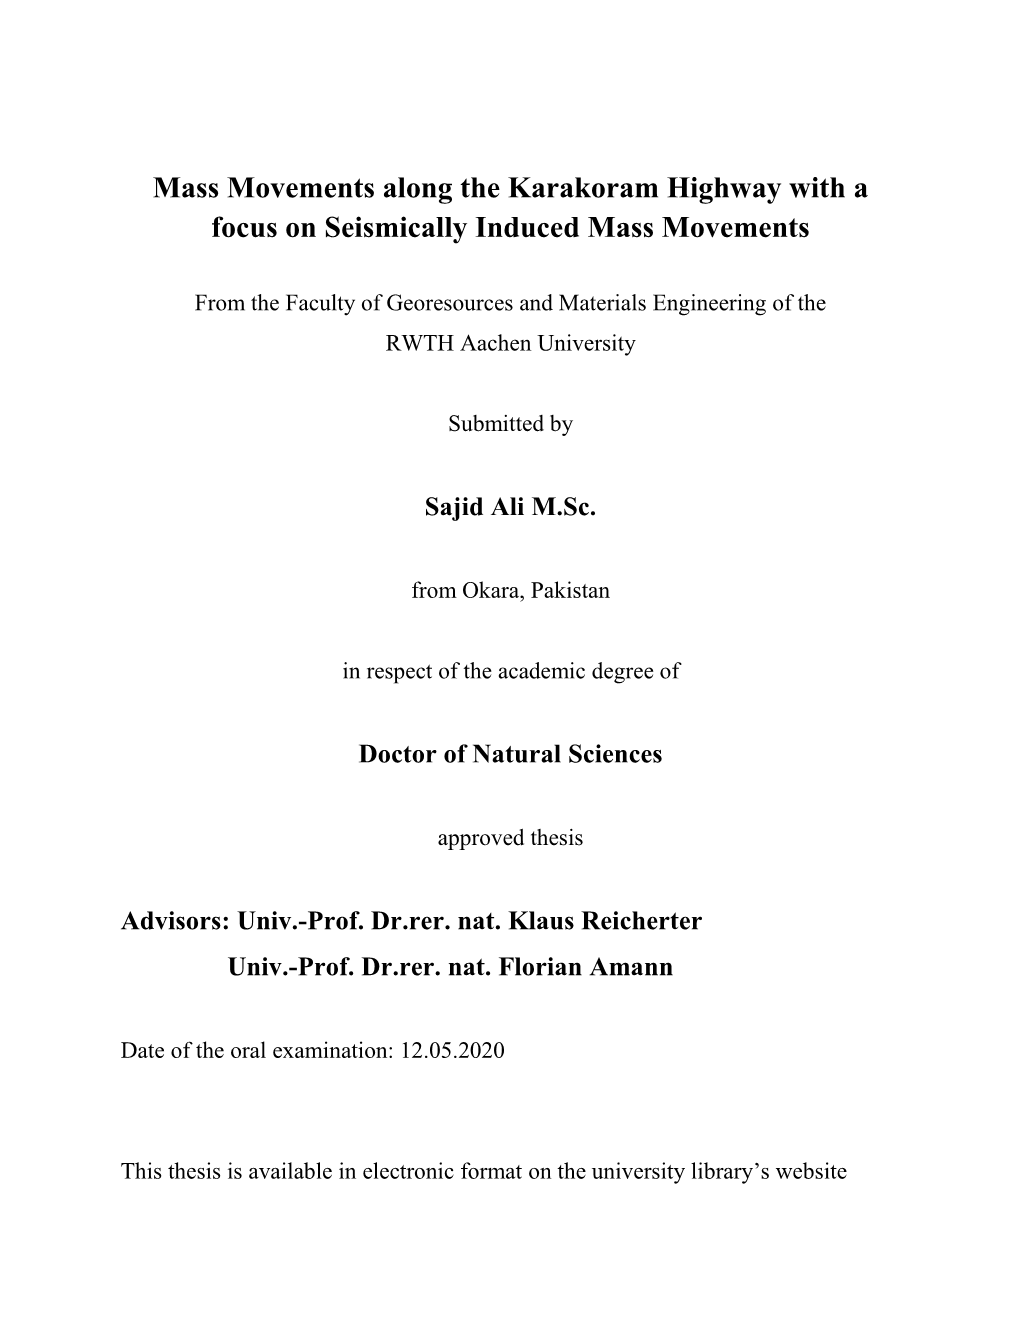 Mass Movements Along the Karakoram Highway with a Focus on Seismically Induced Mass Movements